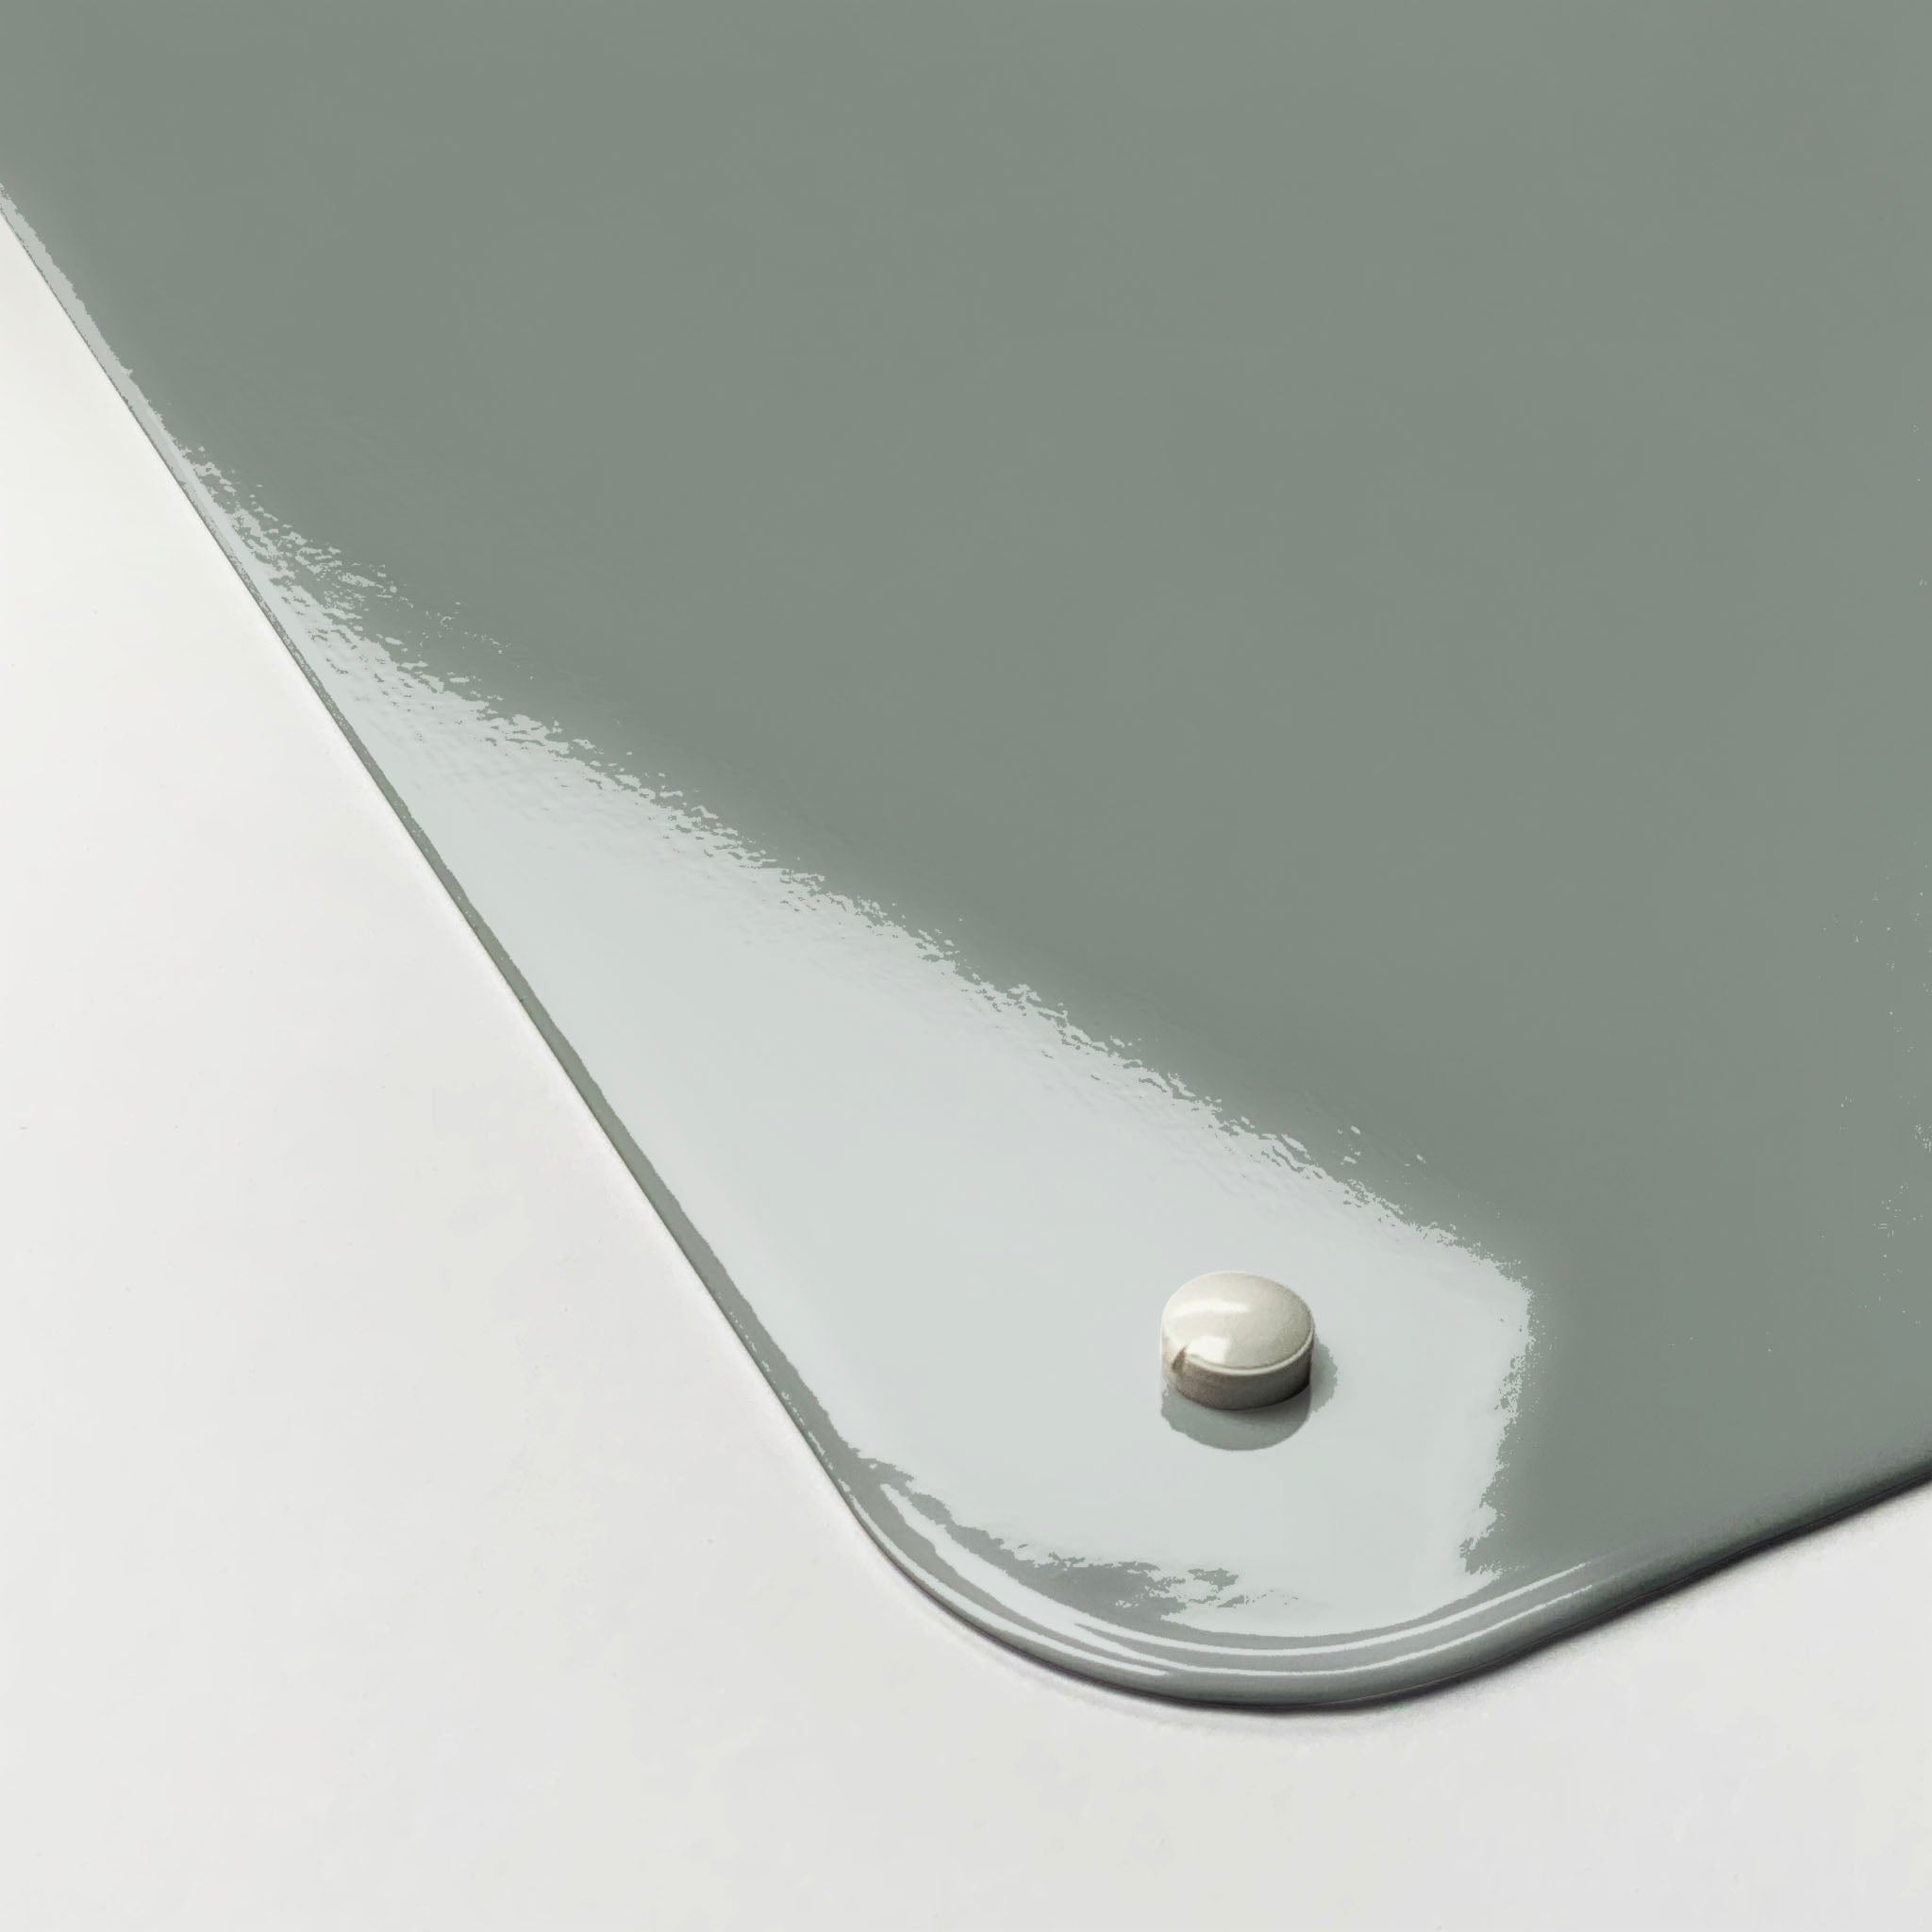 The corner detail of a plain grey magnetic board to show it’s high gloss surface